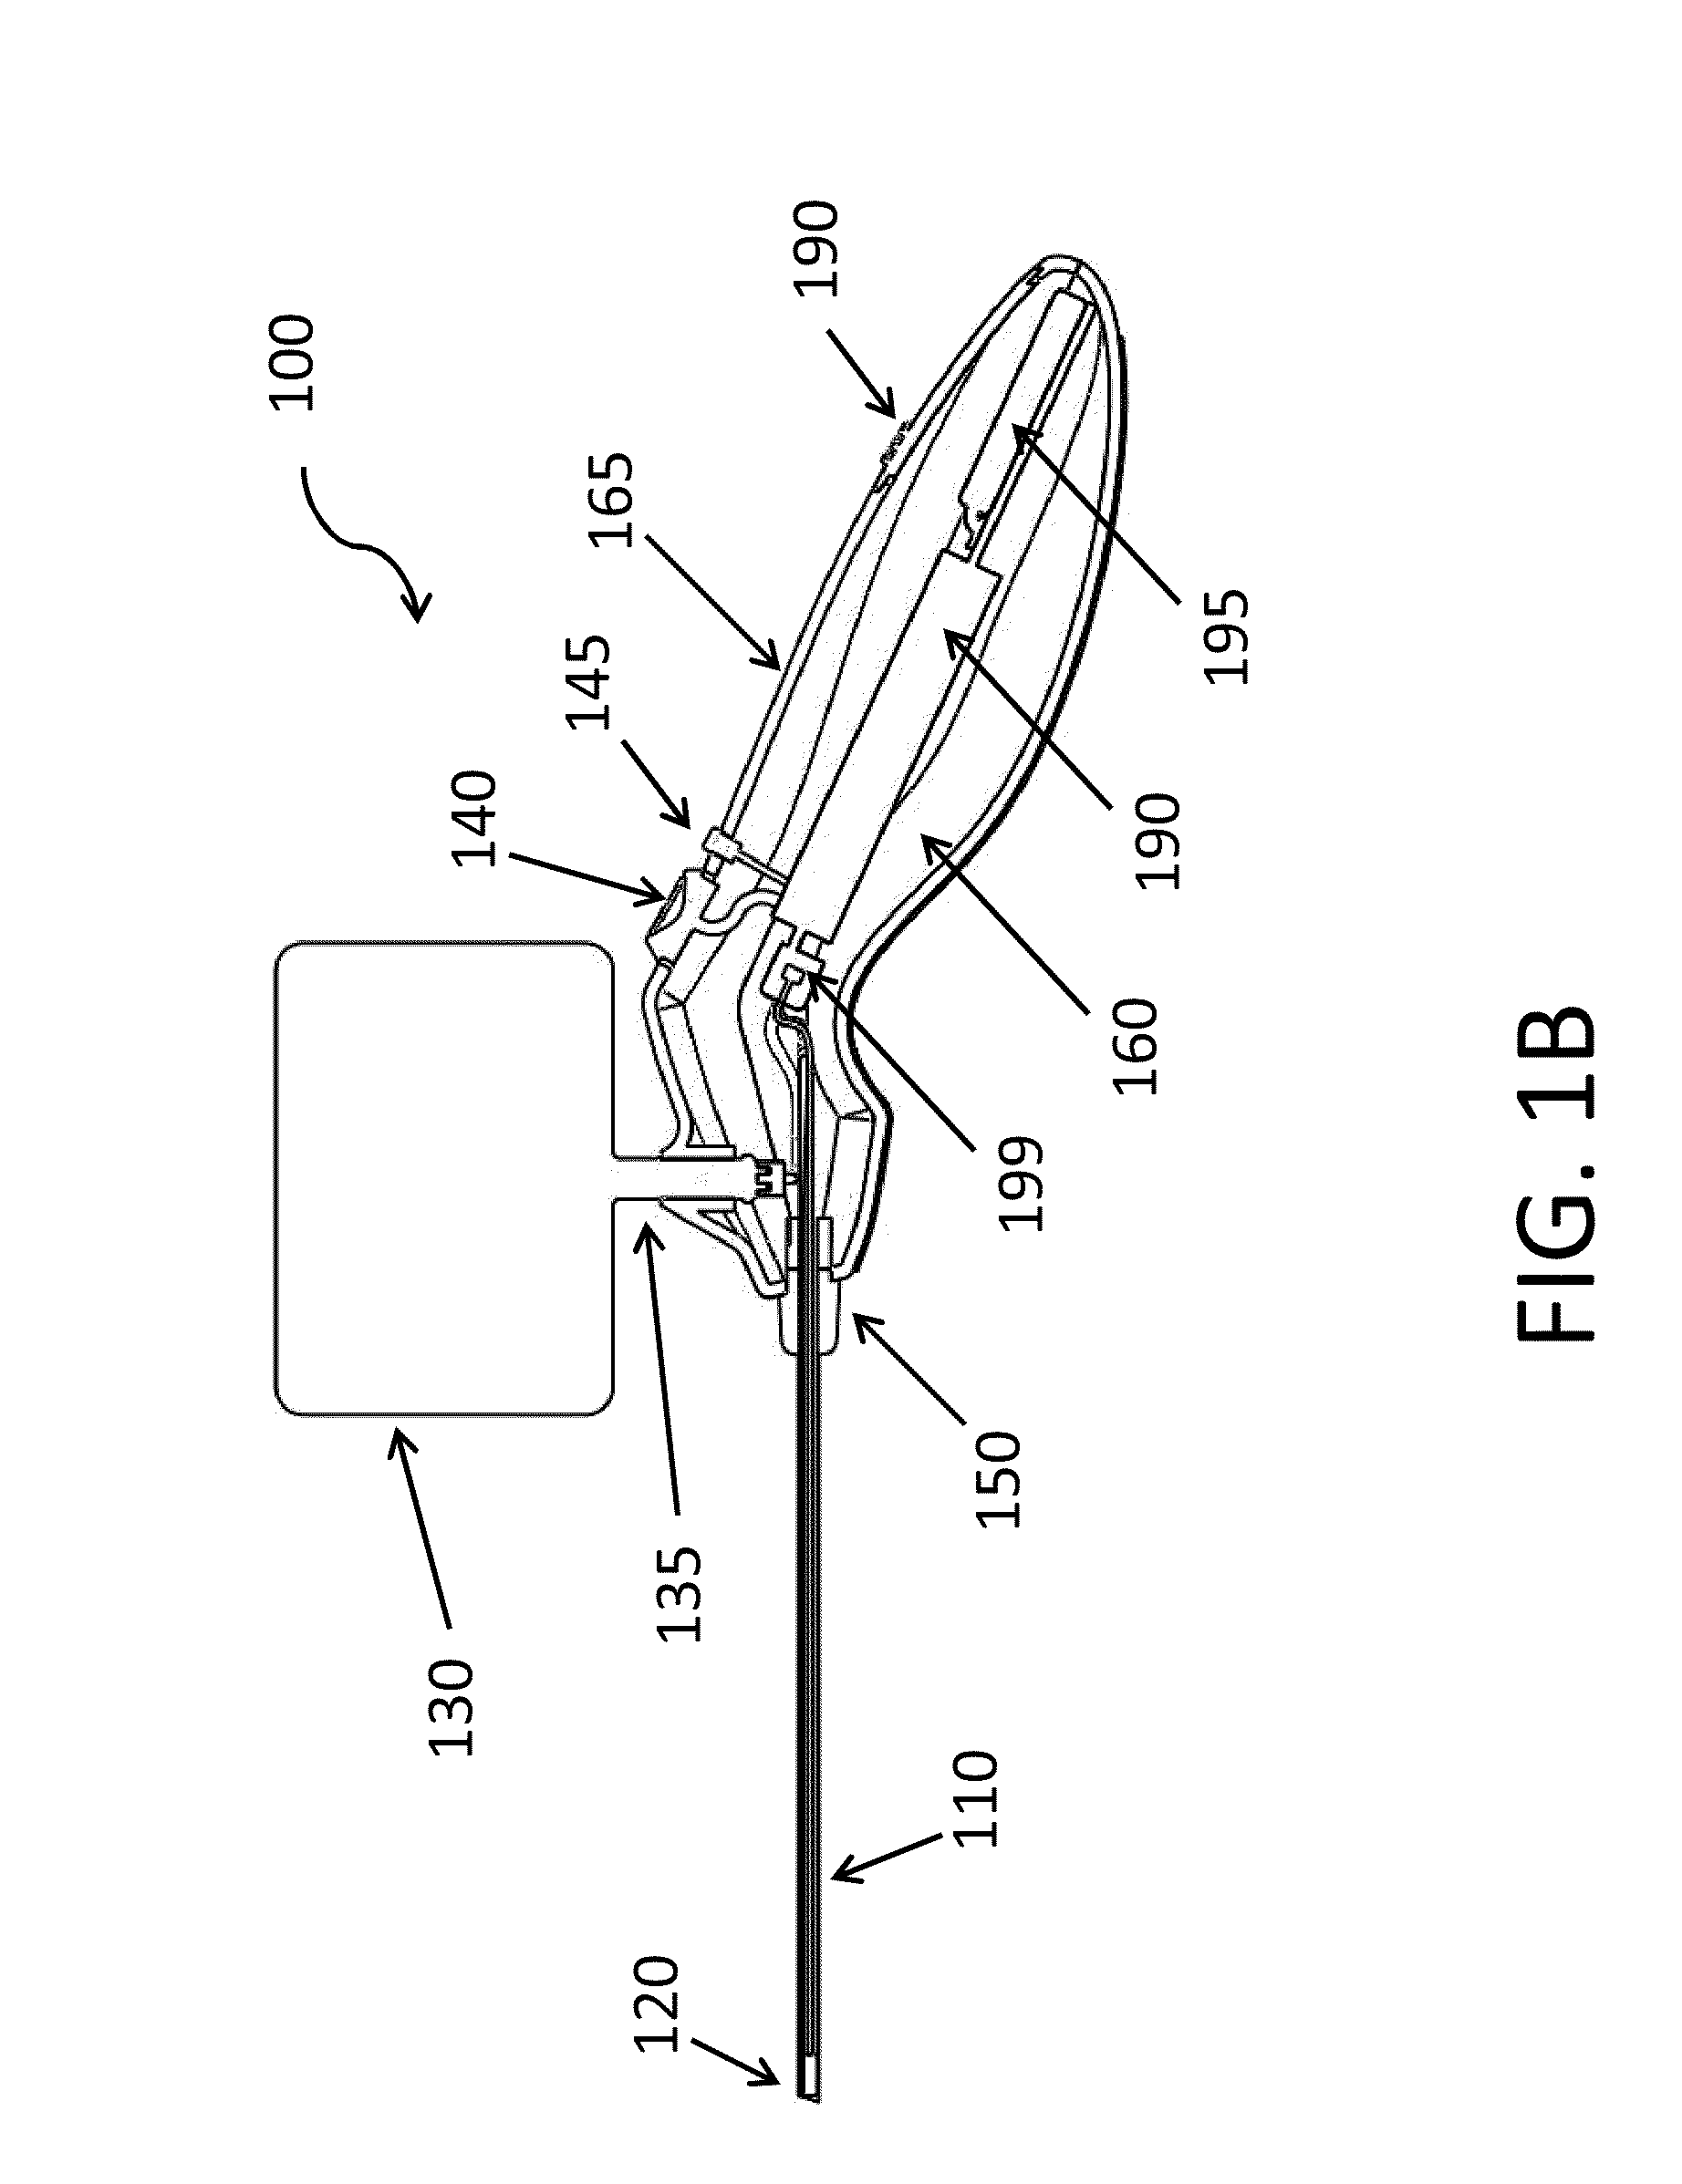 Hand-held minimally dimensioned diagnostic device having integrated distal end visualization